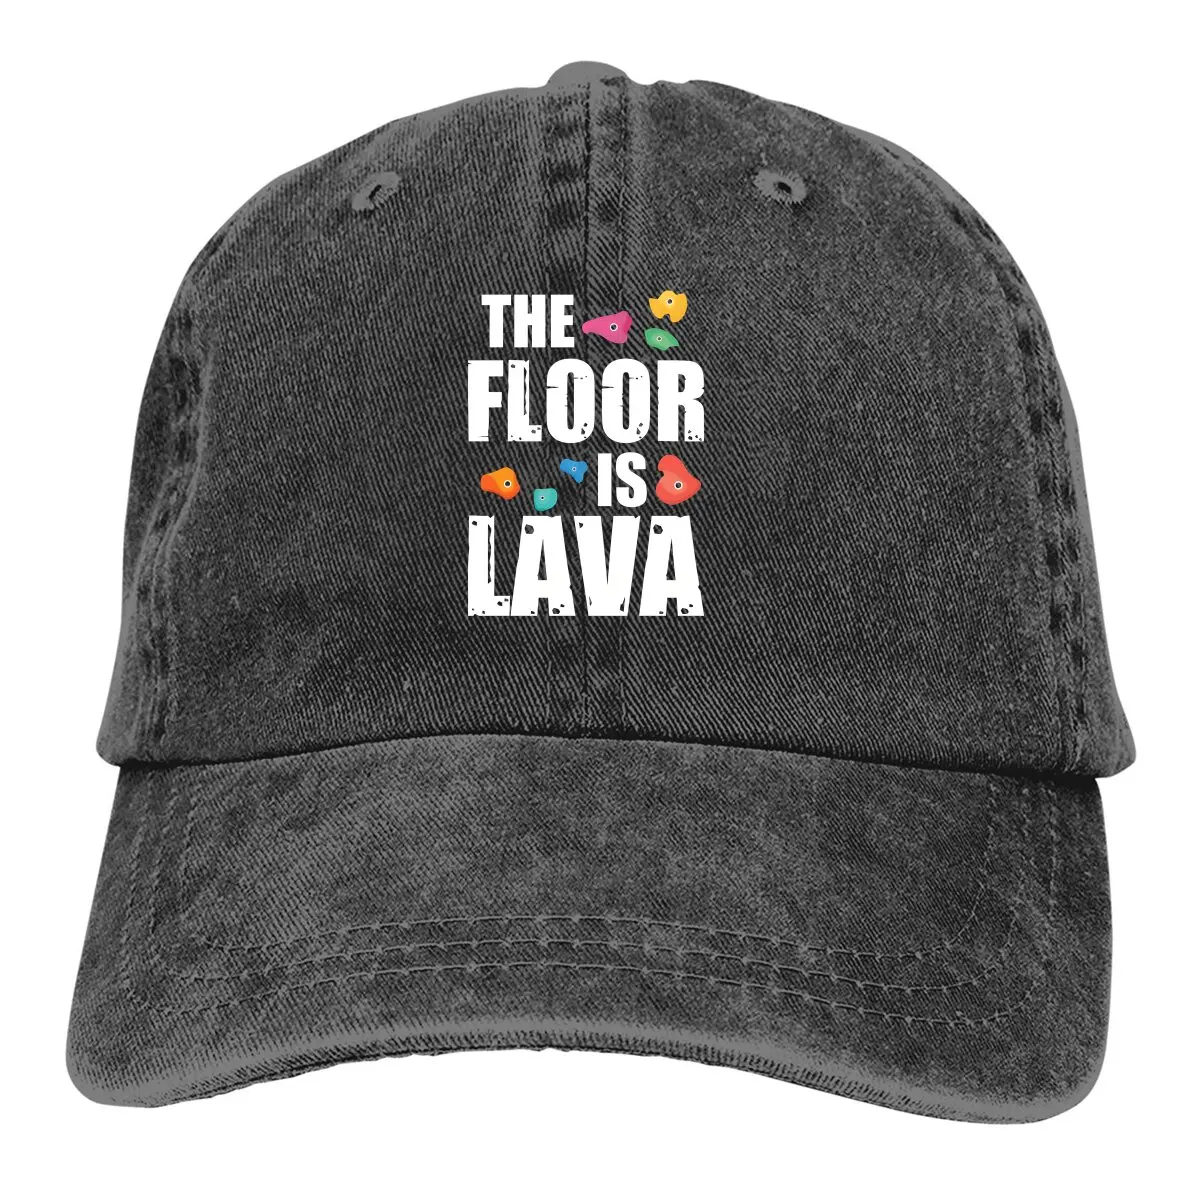 

Washed Men's Baseball Cap Rock Outfits The Floor Is Lava Trucker Snapback Cowboy Caps Dad Hat Mountain Climber Golf Hats